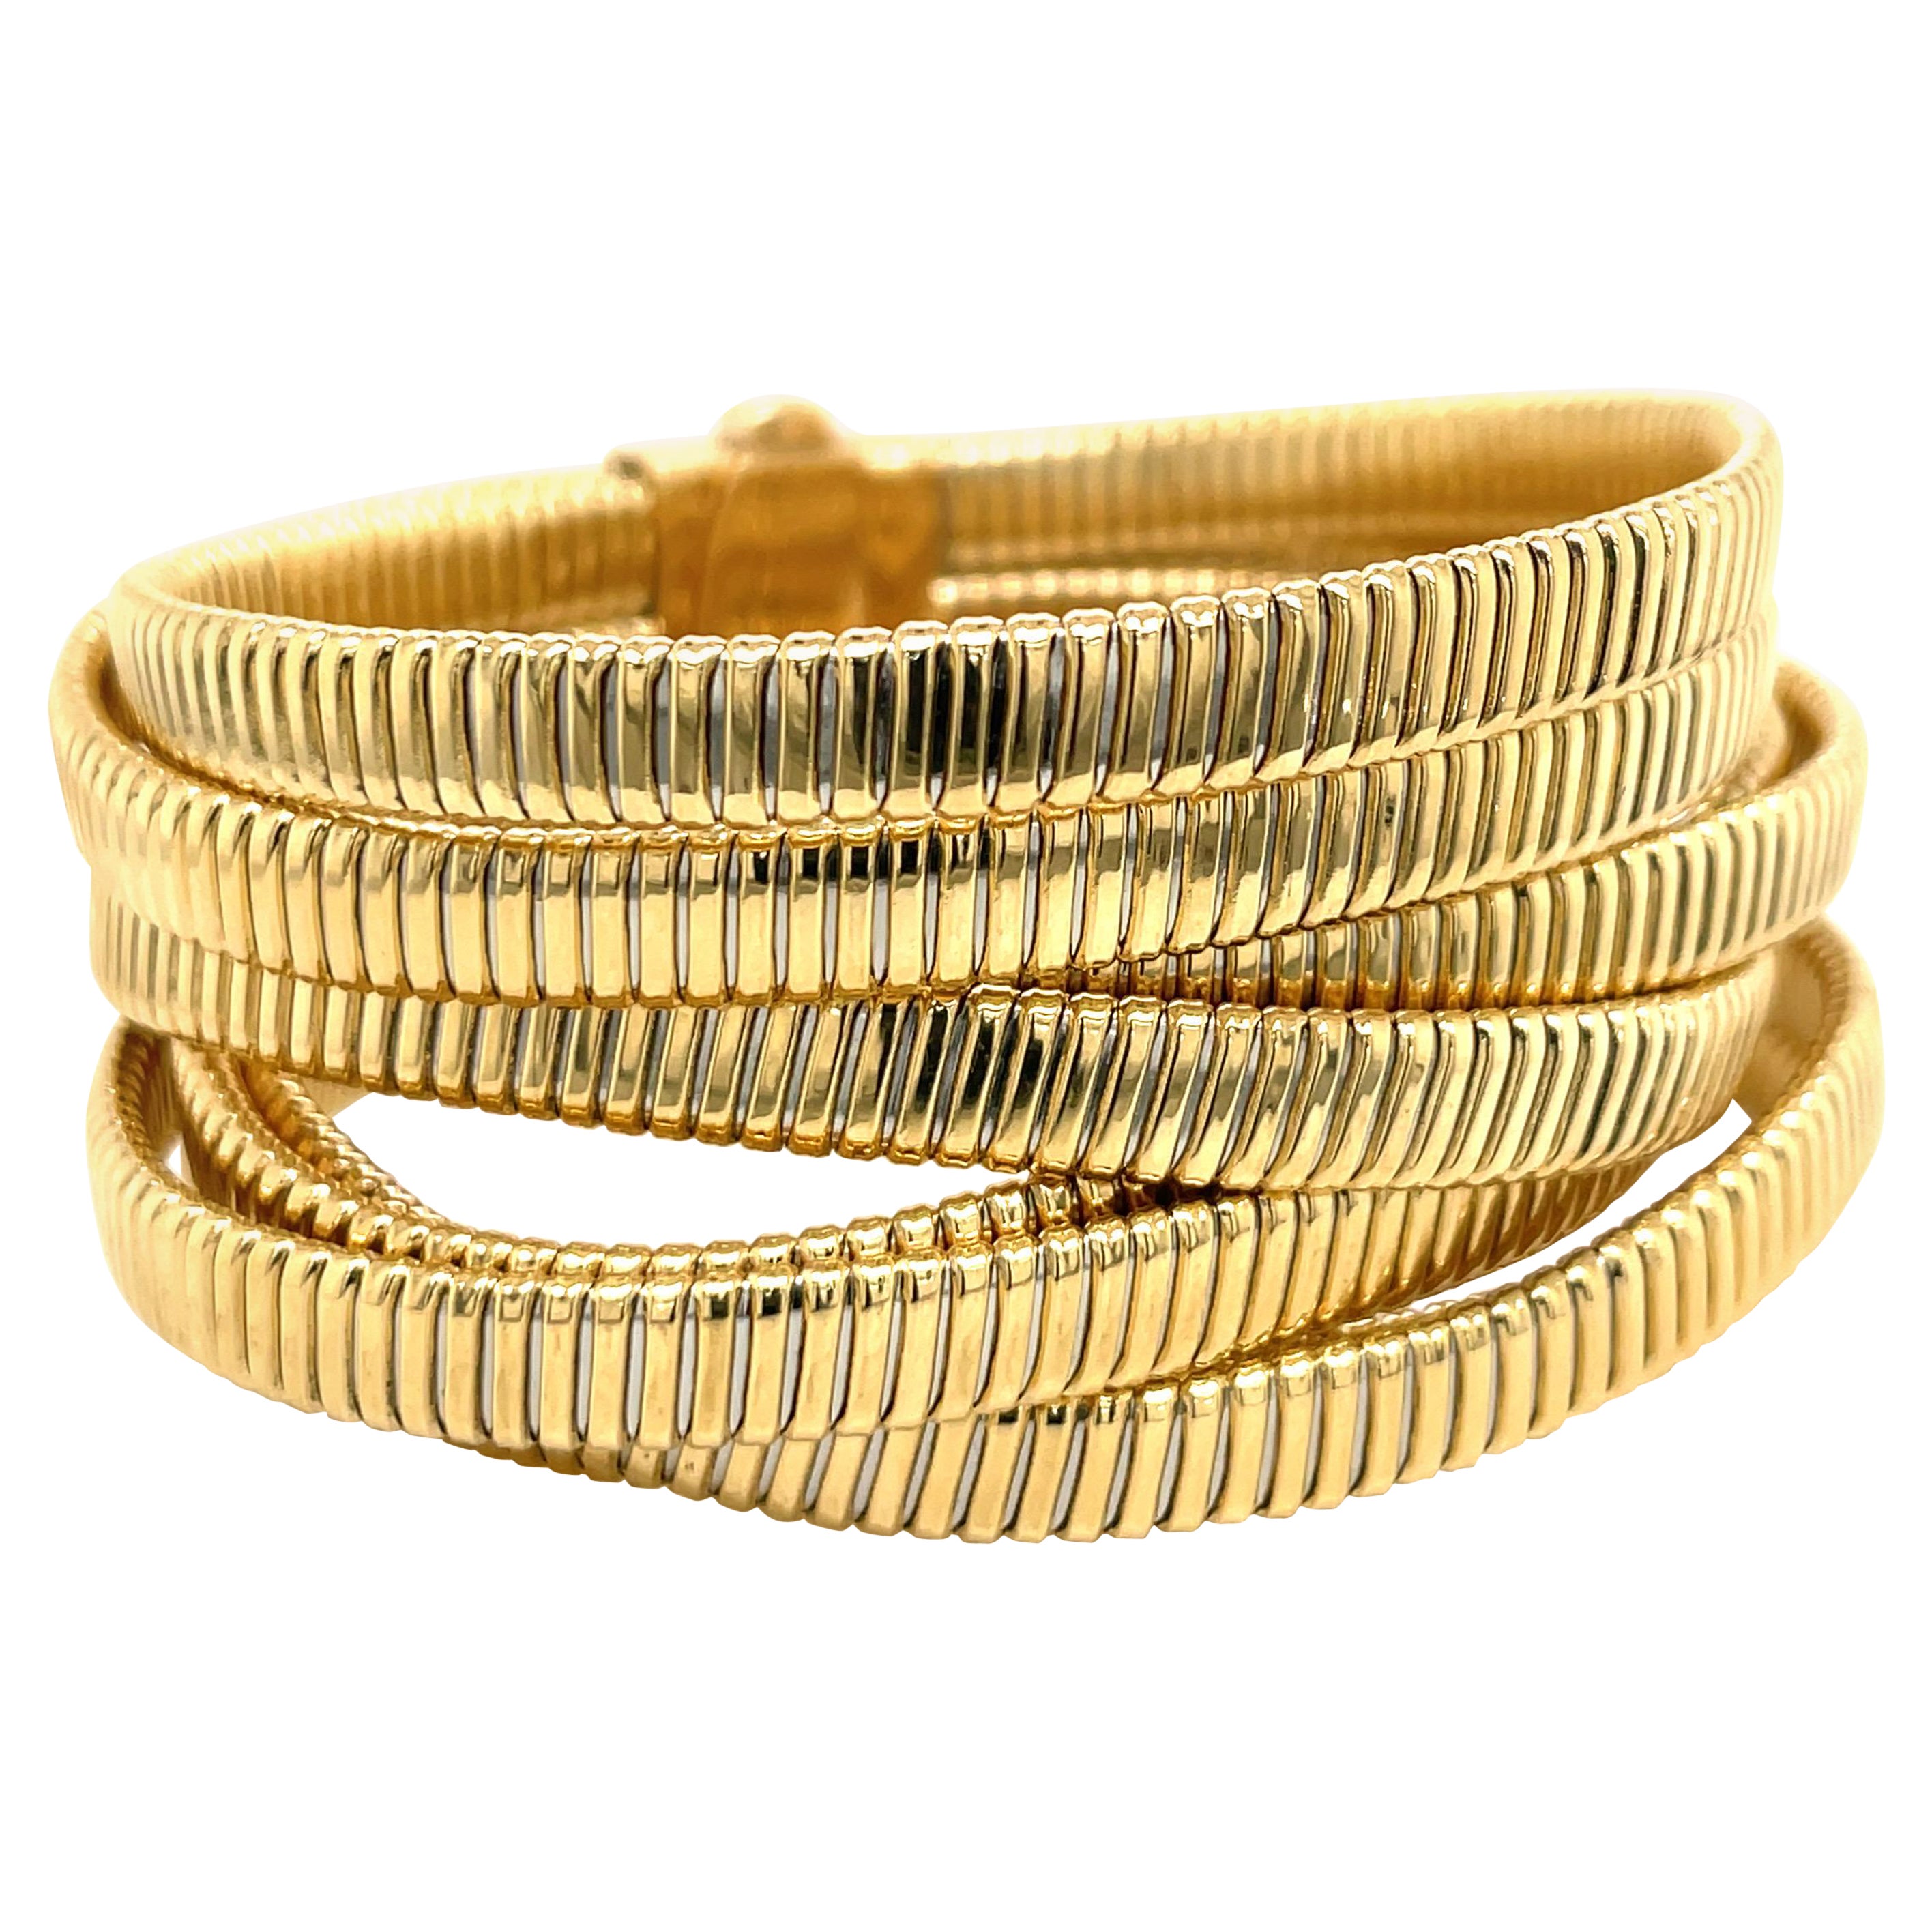 TraxNYC's Best Buy Cuban Link Bracelet 8 Inches 4.6mm 66726: buy online in  NYC. Best price at TRAXNYC.